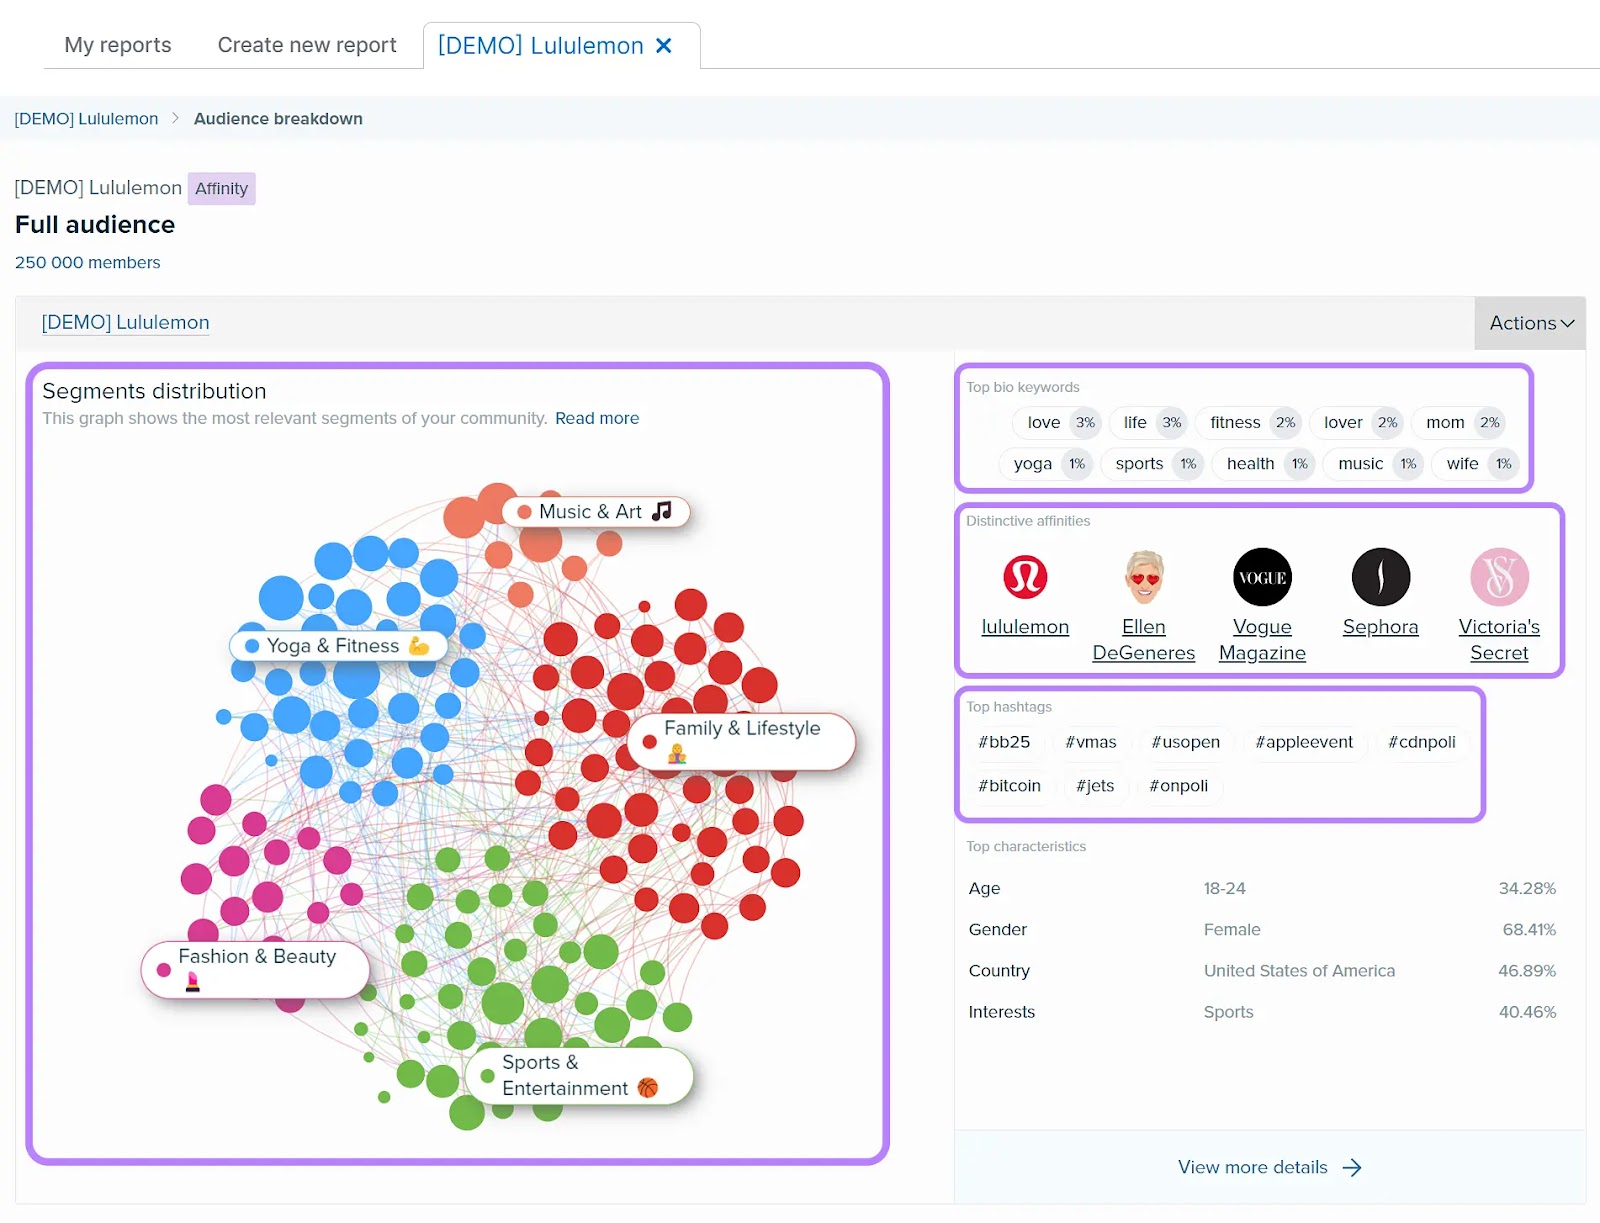 Segments distribution, top bio keywords, distinctive affinities, and top hashtags data shown in Audience Intelligence app